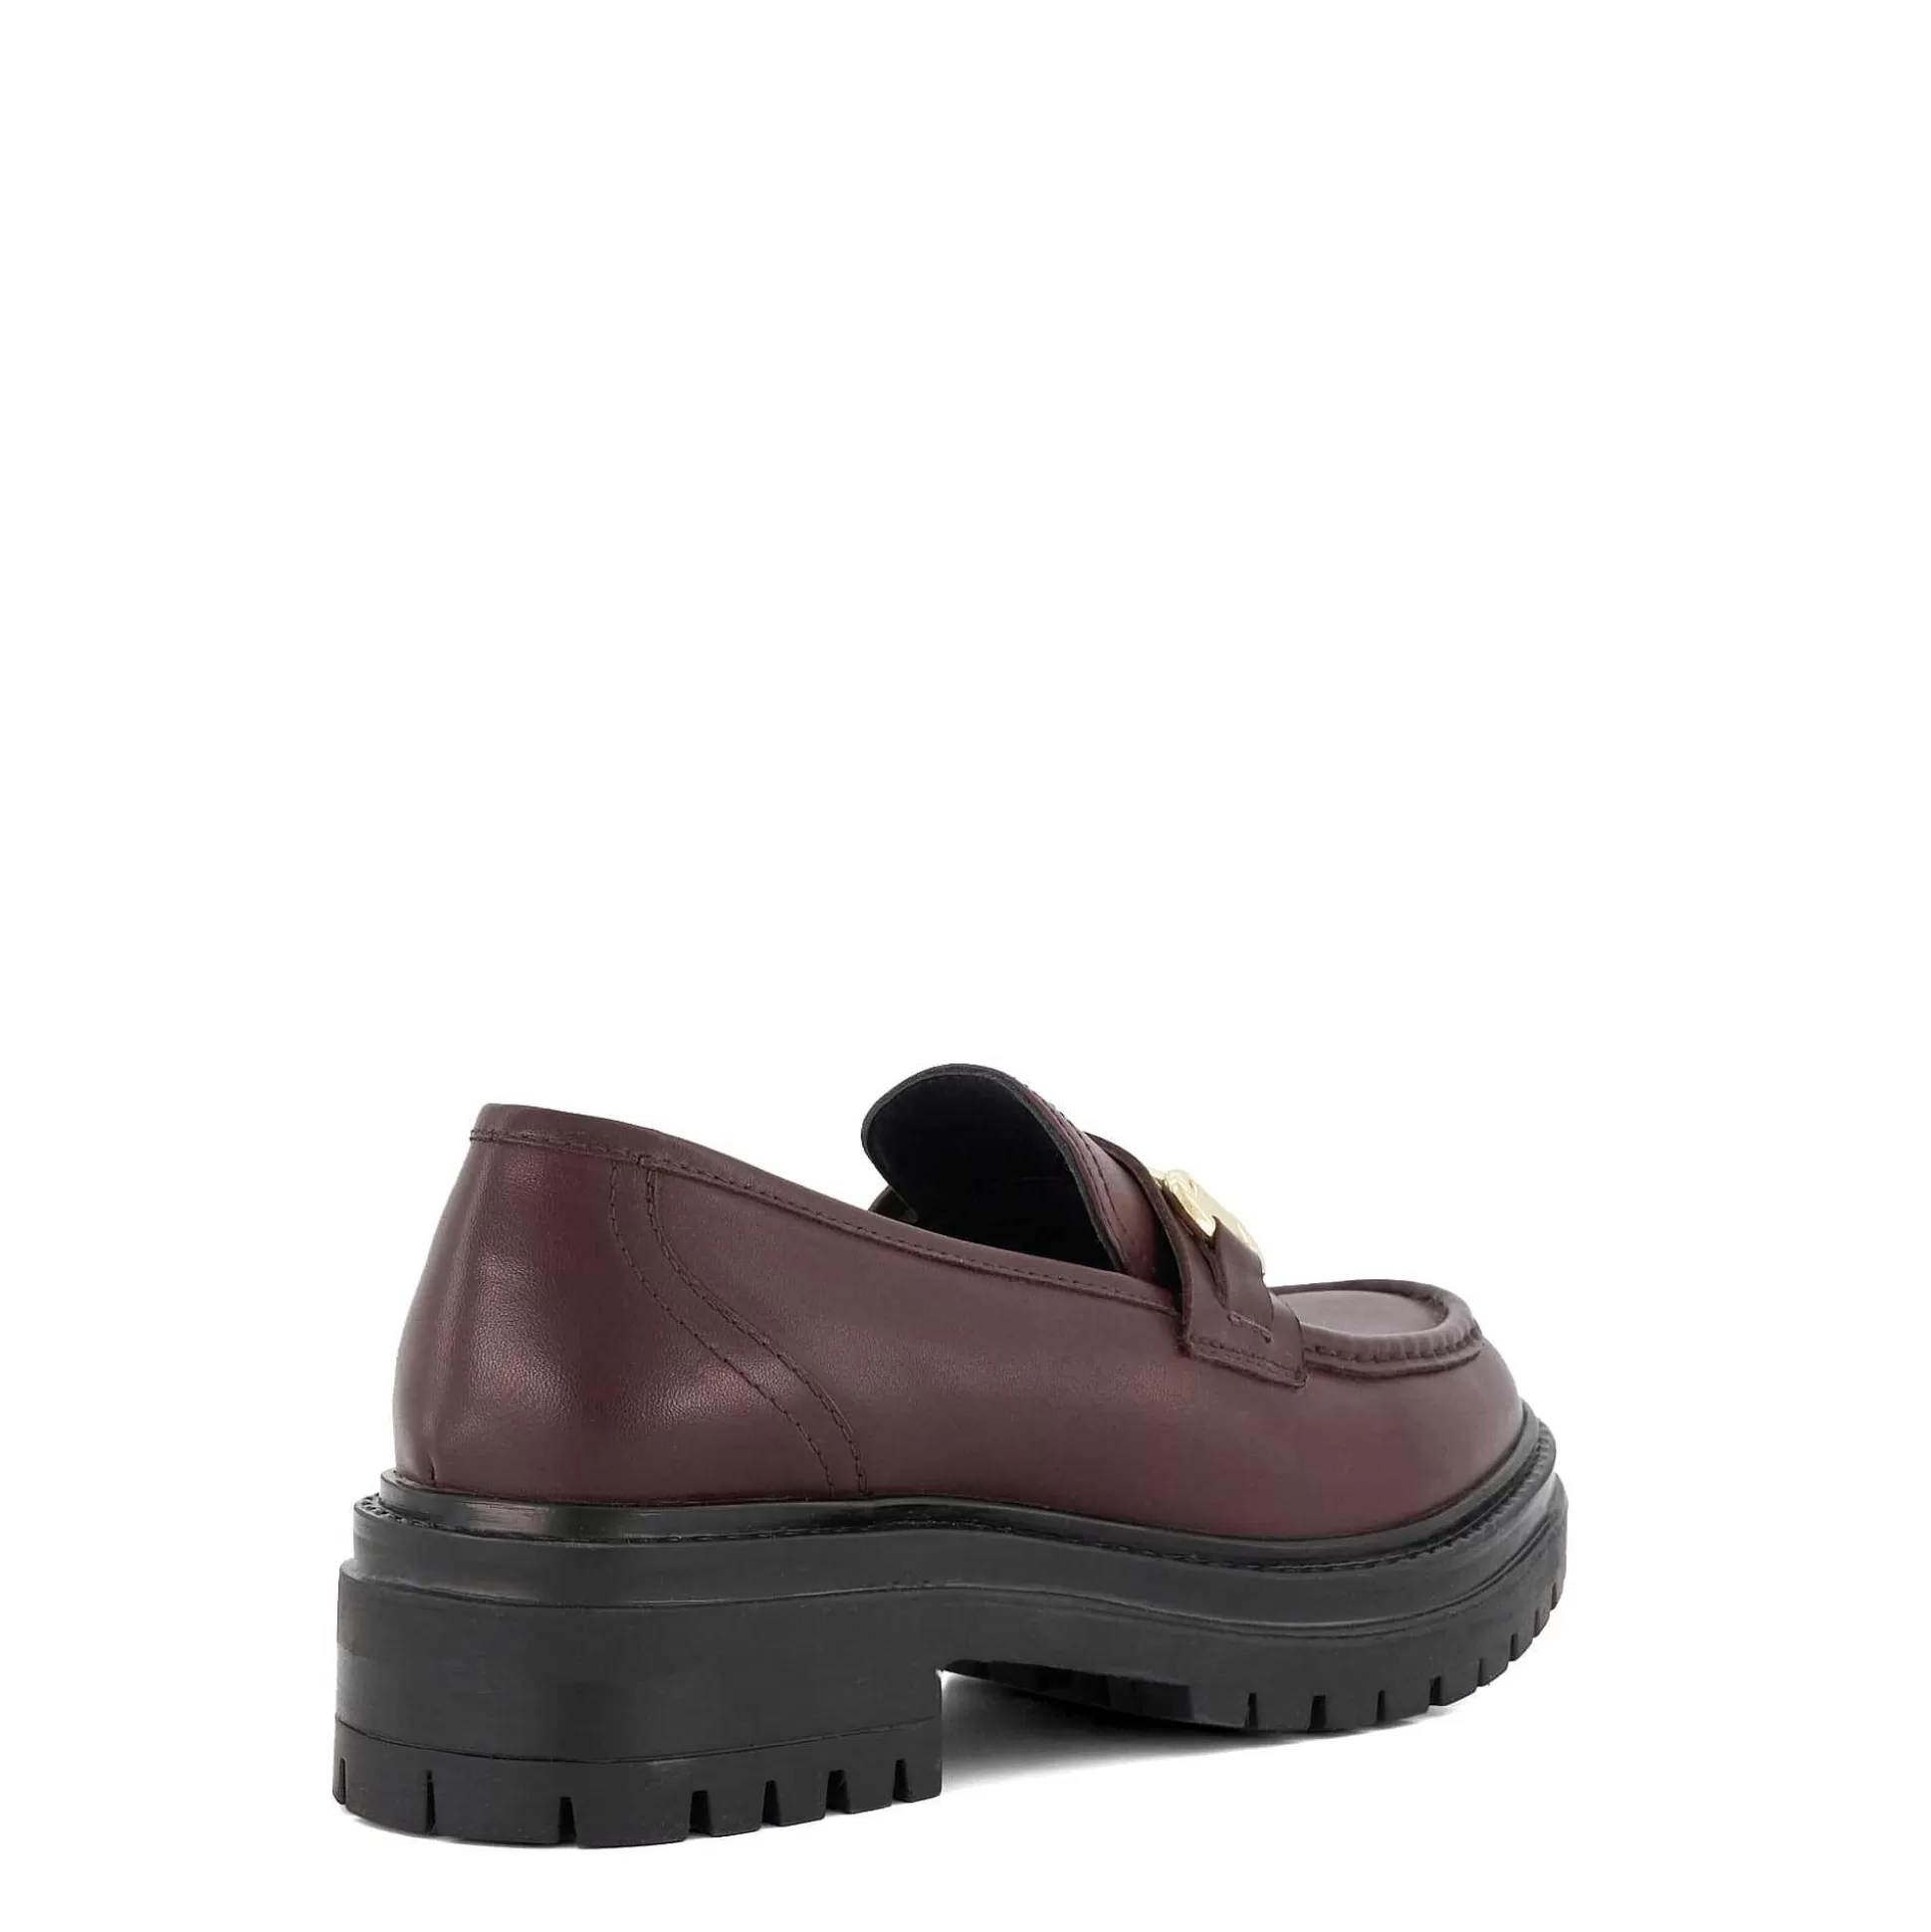 Dune London GALLAGHER - BURGUNDY-Women Flat Shoes | Loafers